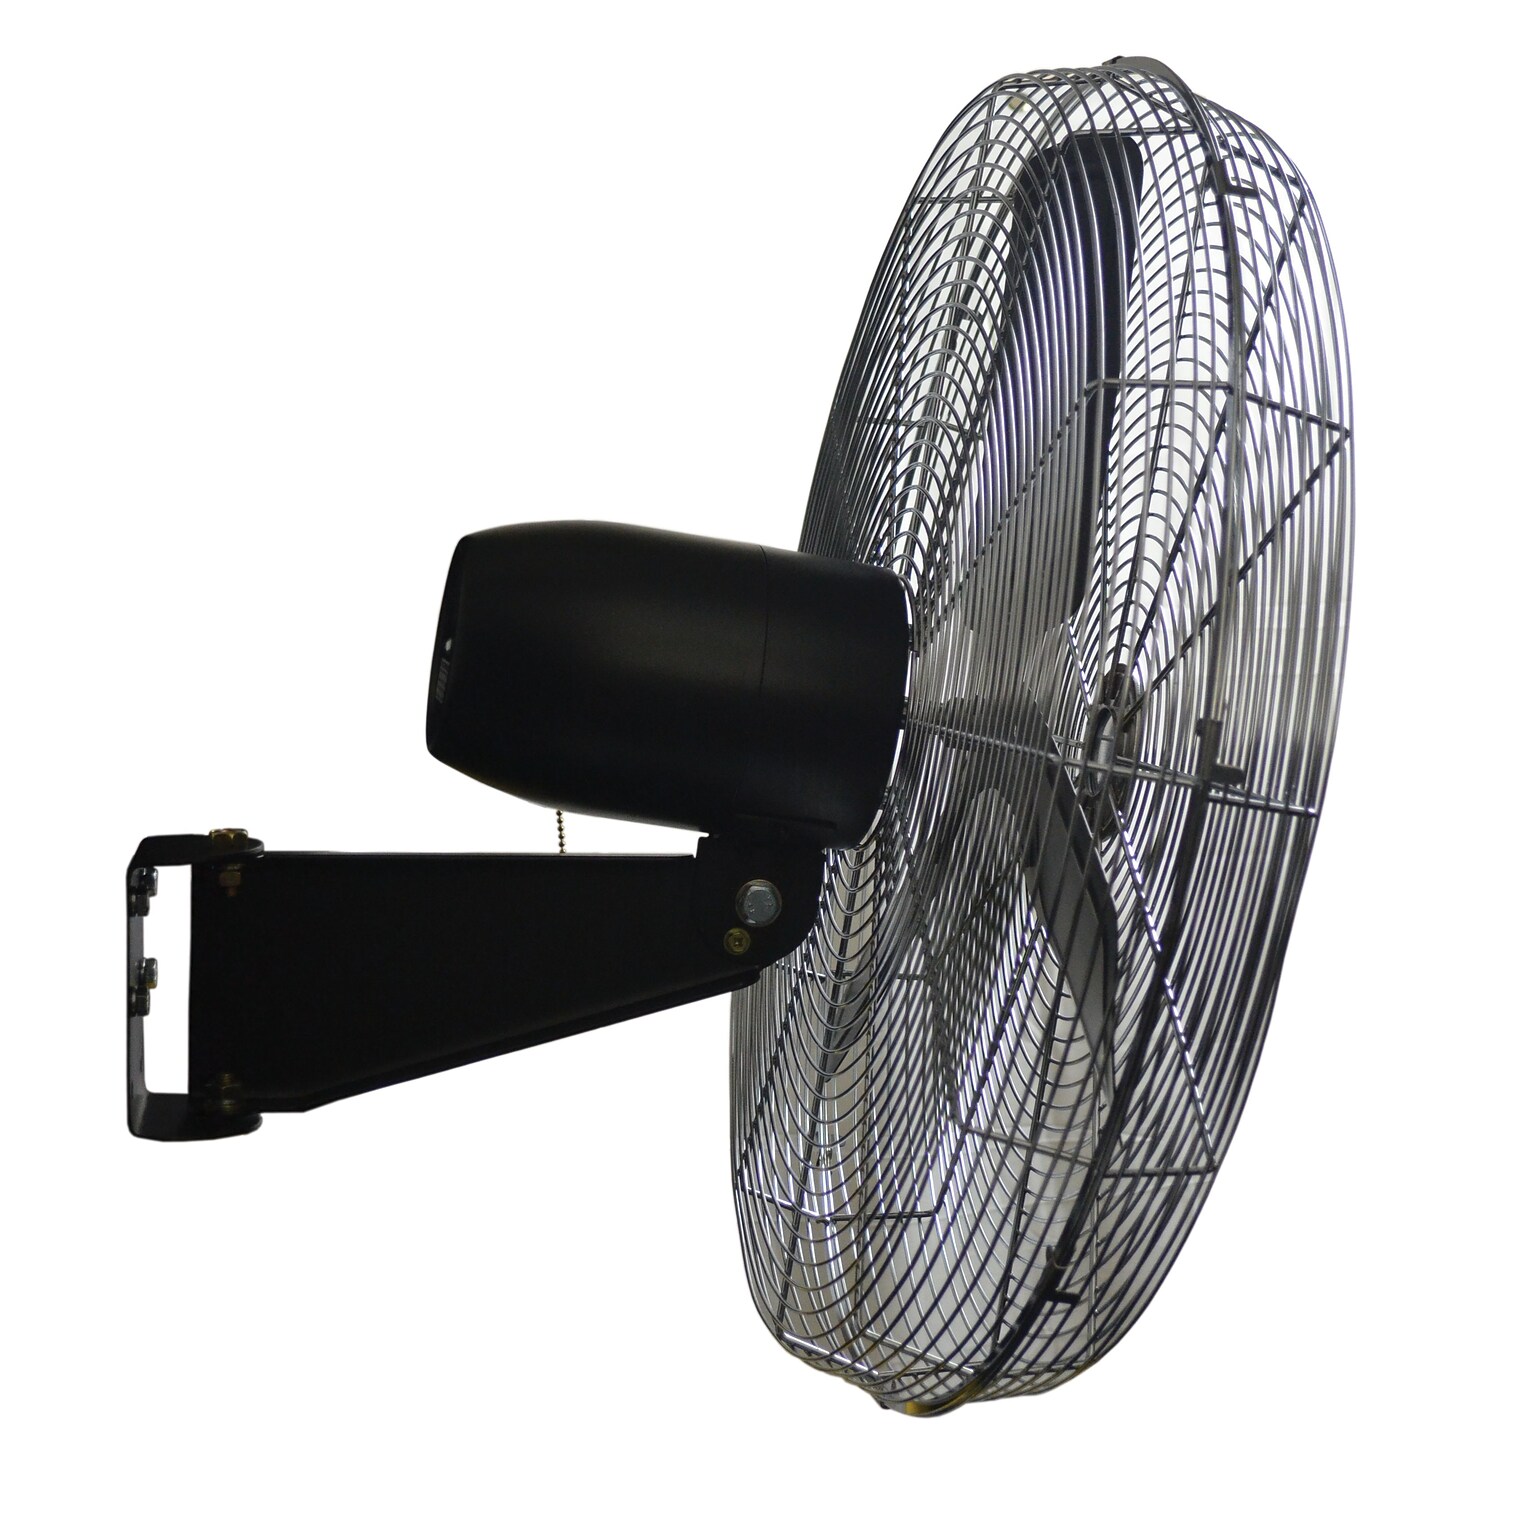 TPI Commercial 30 Wall Mount Fan, 3-Speed, Gray/Silver (CACU30W)